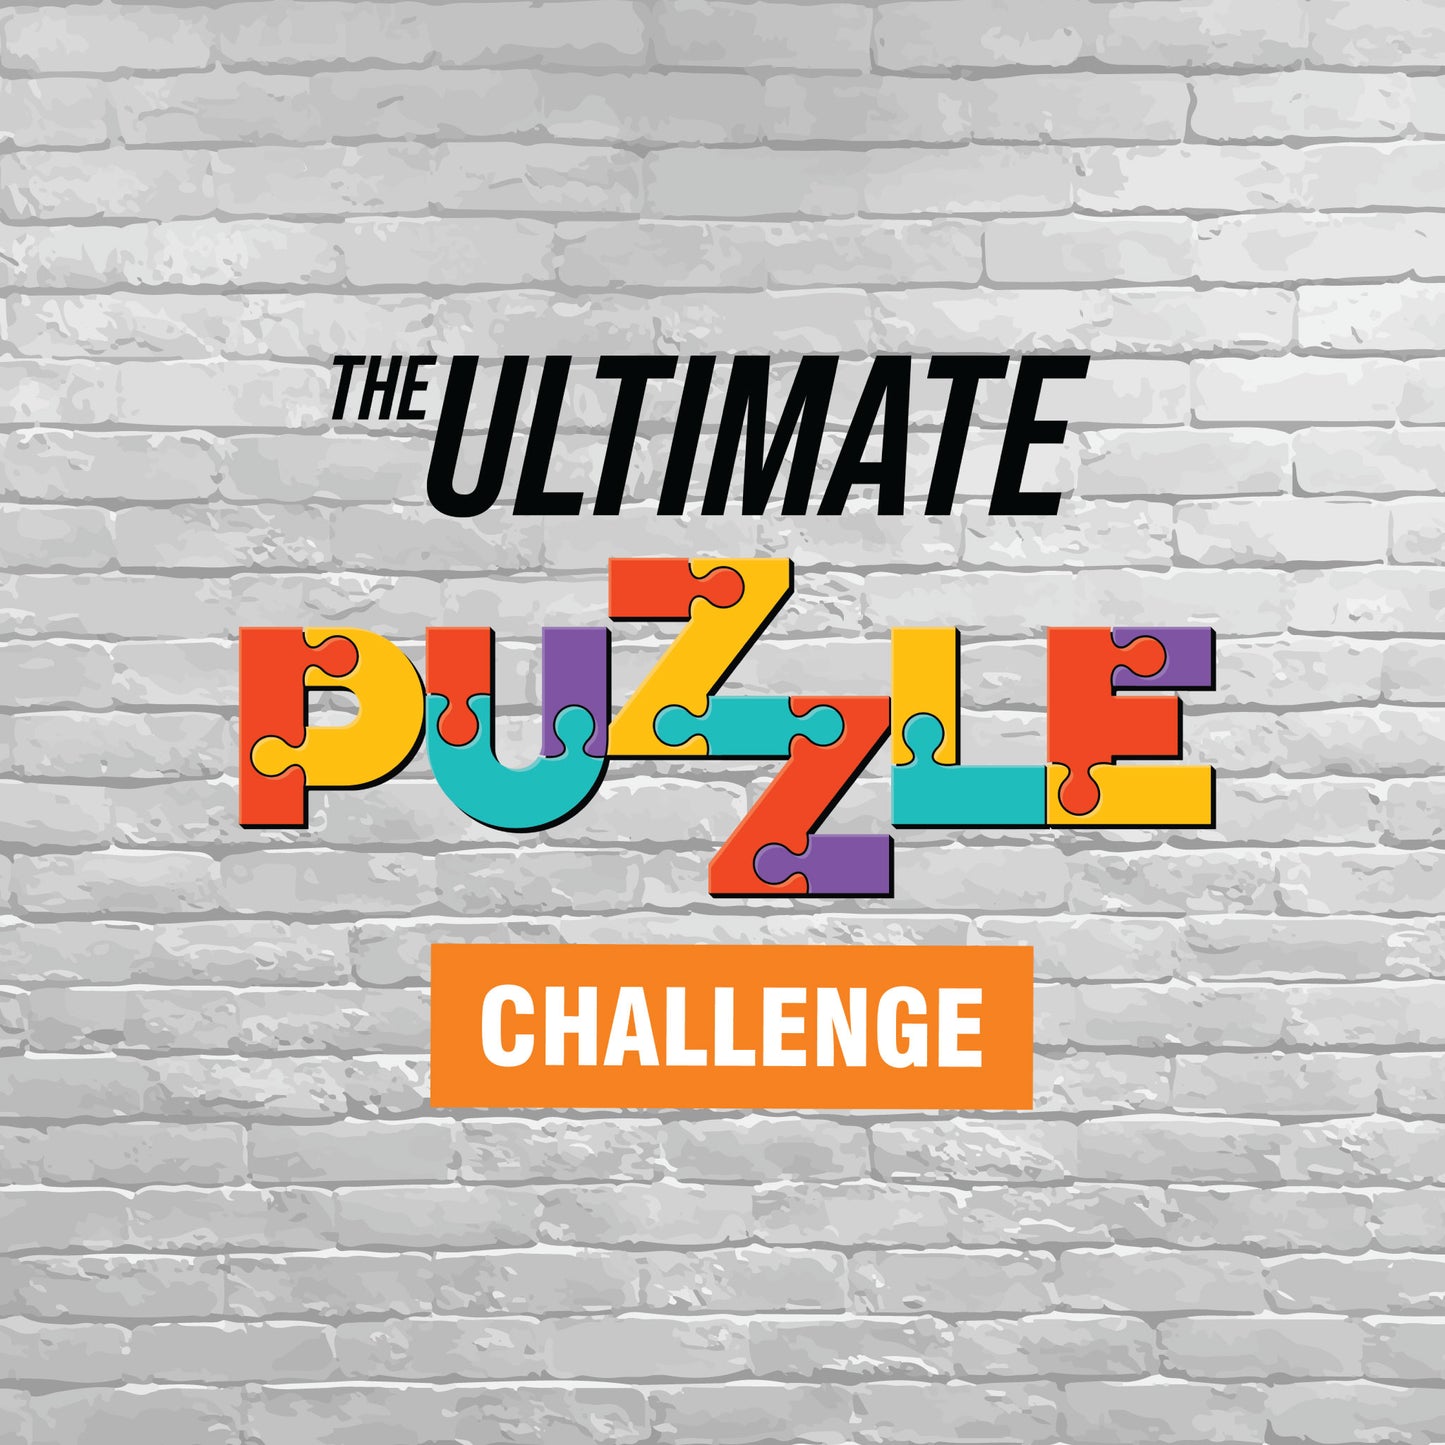 The Ultimate Puzzle Challenge